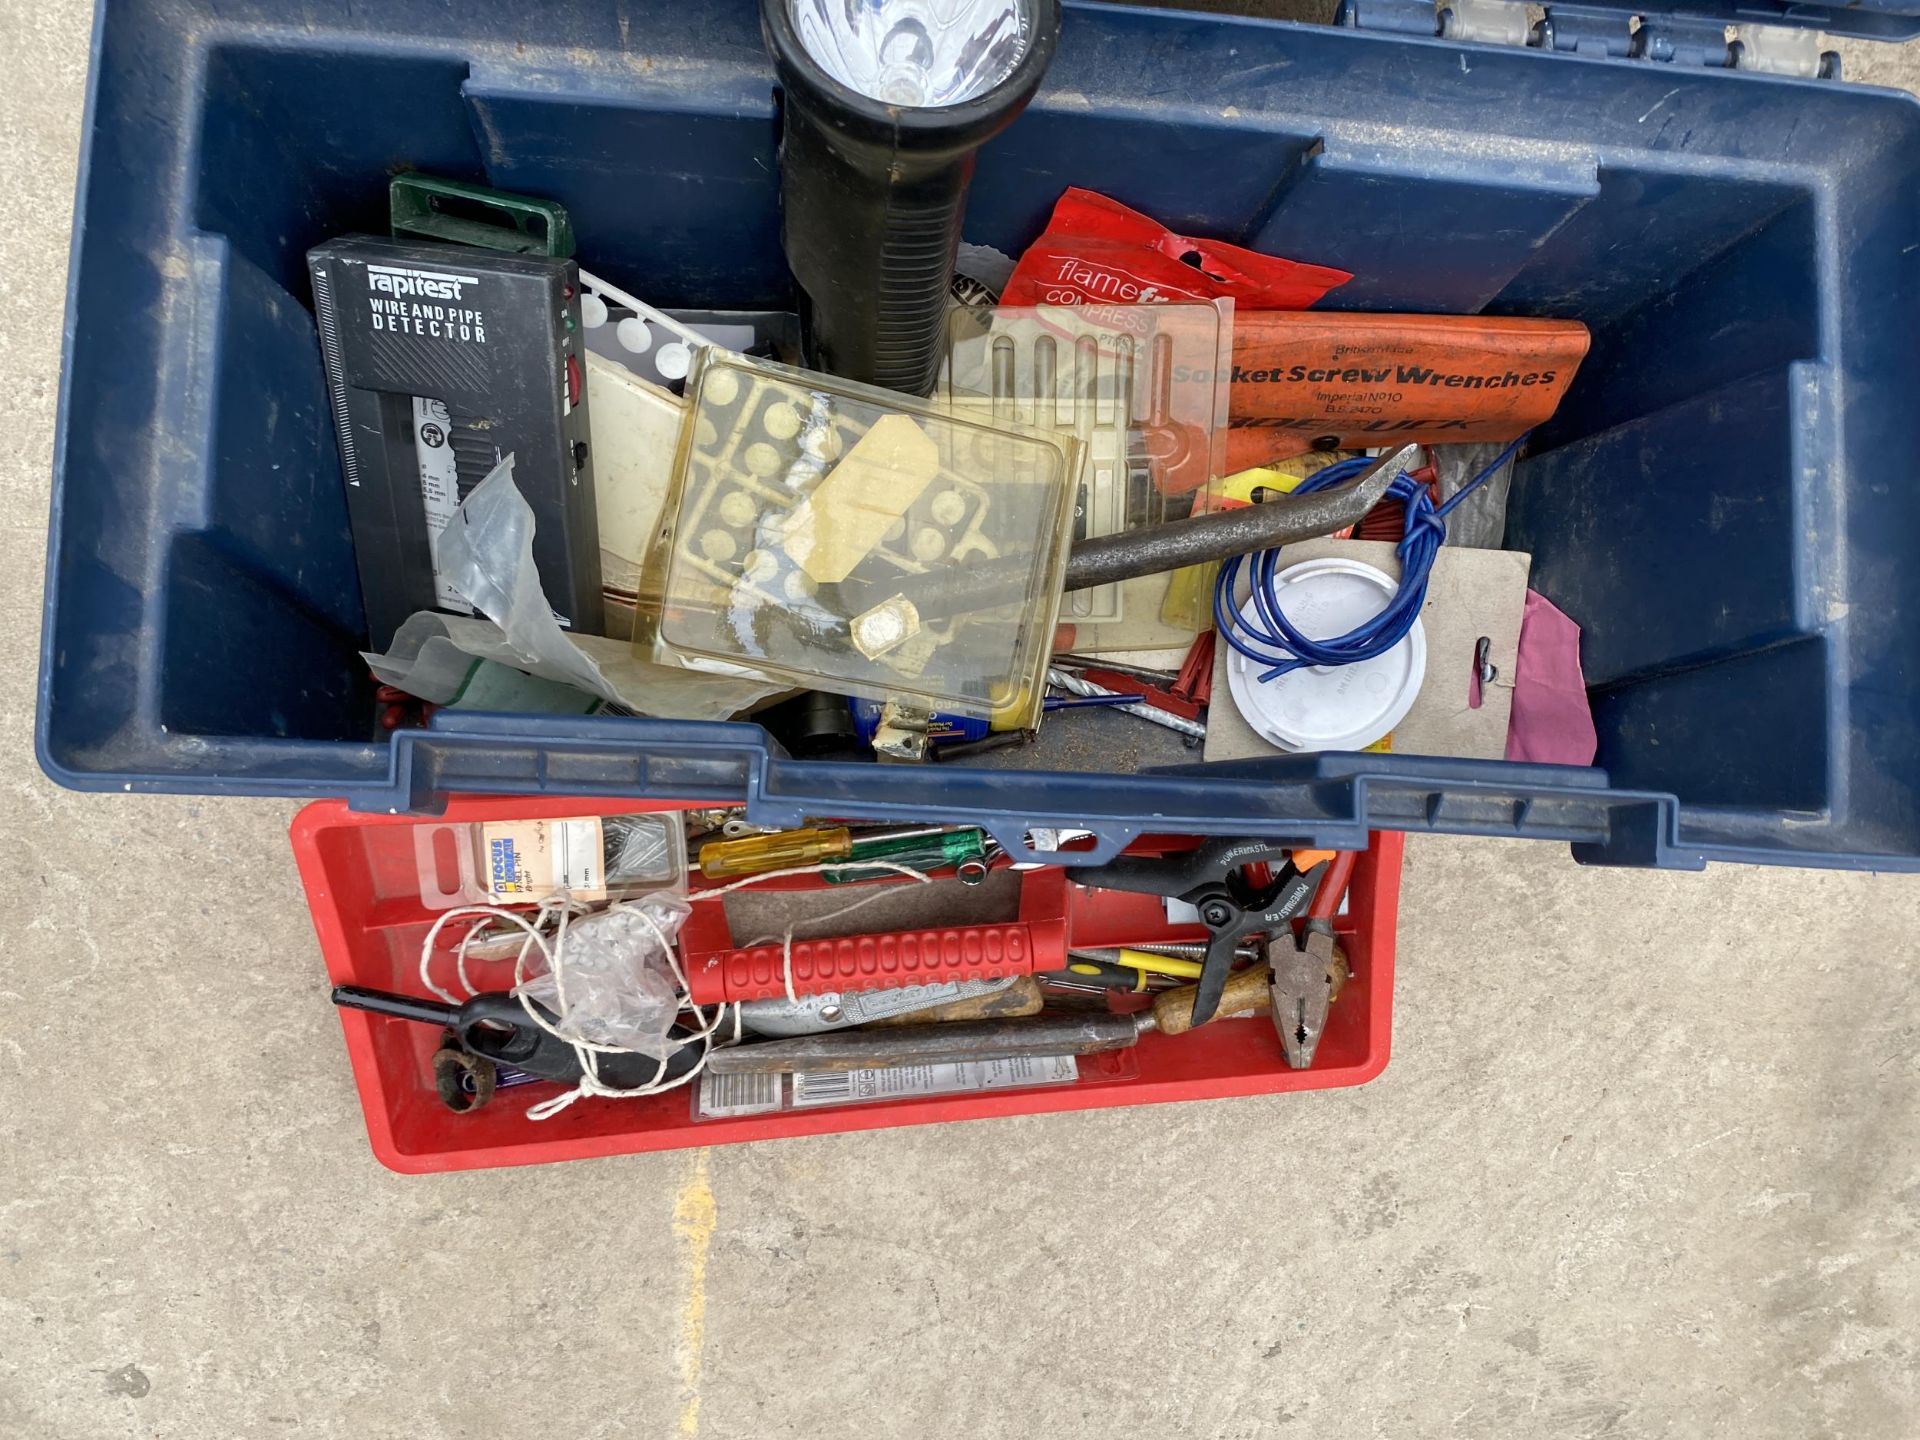 TWO PLASTIC TOOL BOXES CONTAINING AN ASSORTMENT OF TOOLS AND HARDWARE - Image 3 of 4